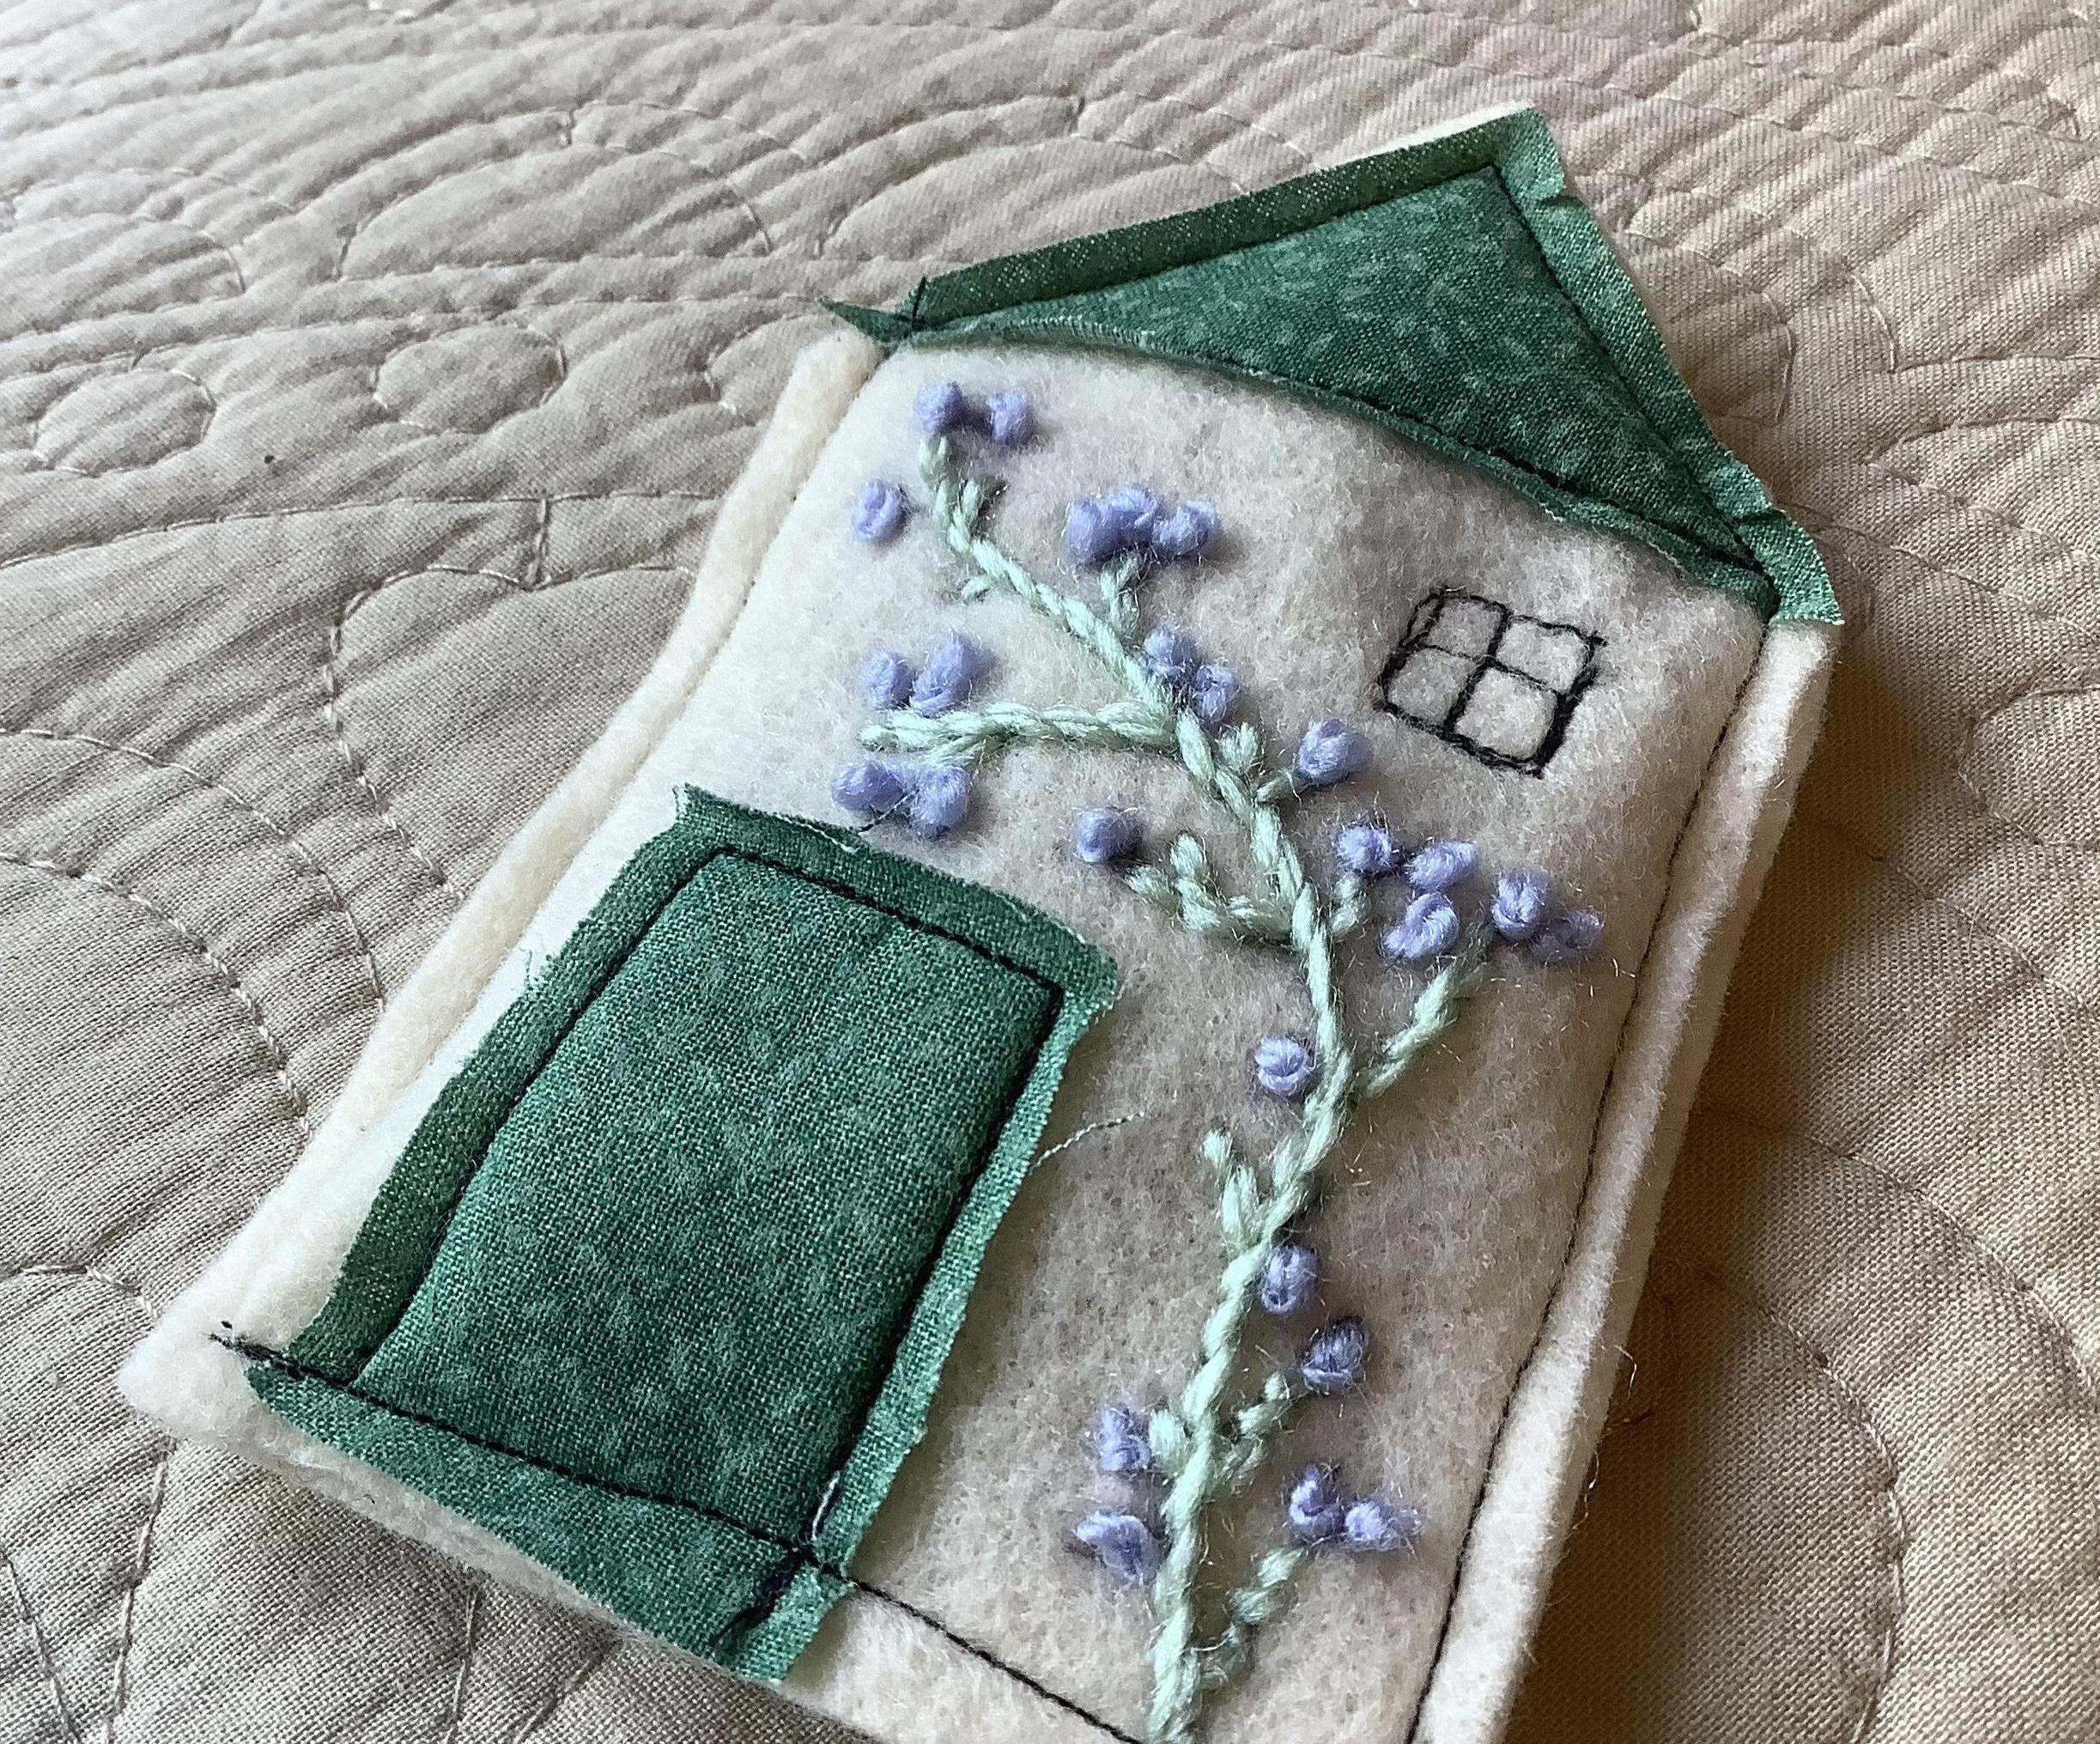 The Green One - a Lavender Sachet